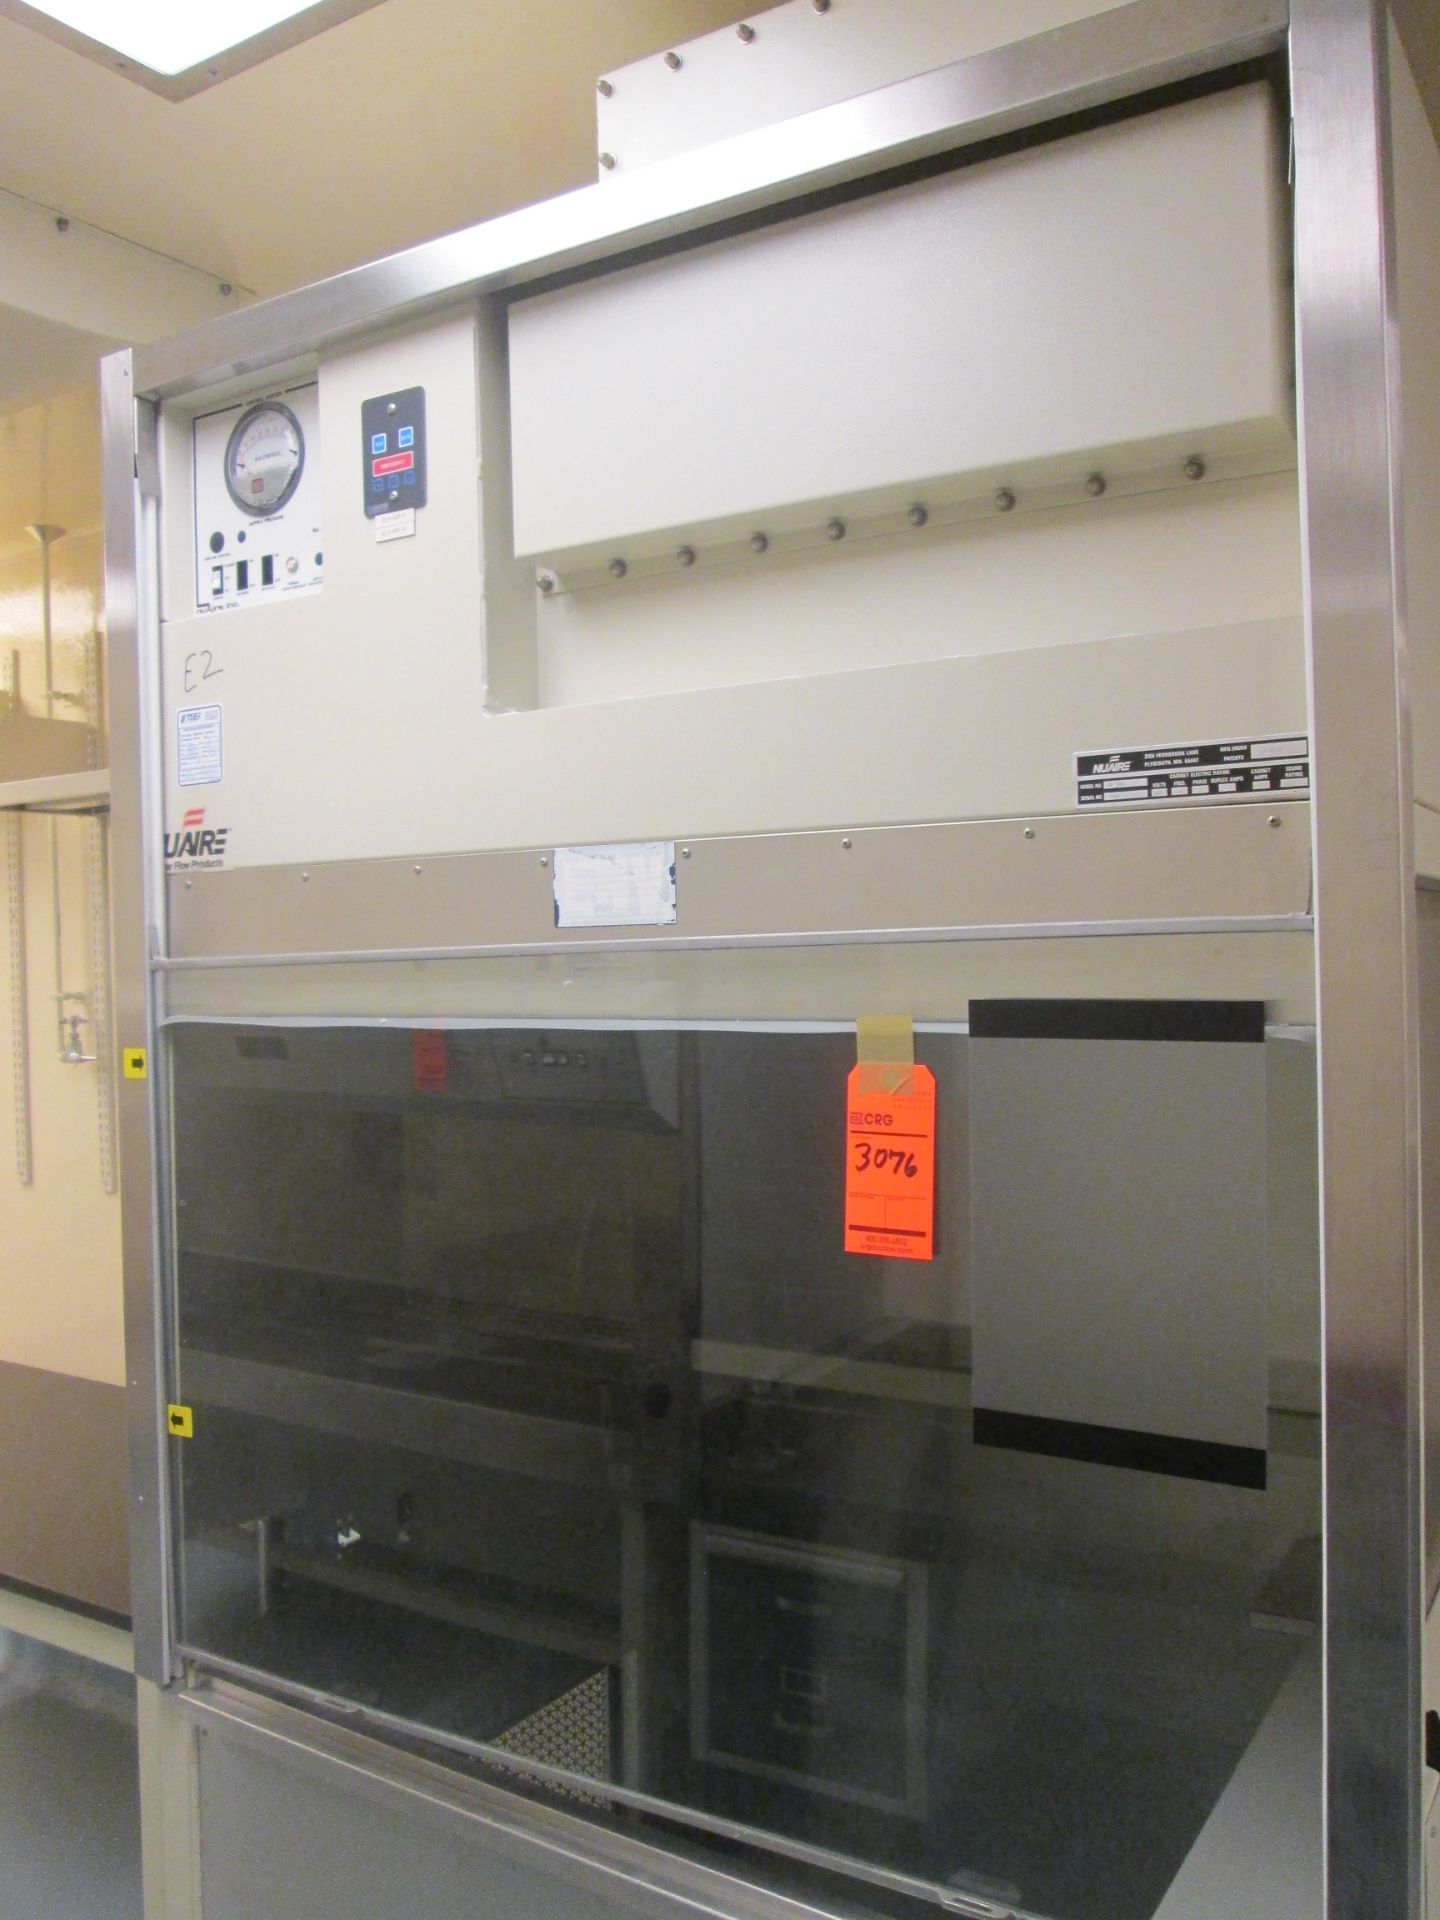 NuAire biological safety exhaust cabinet m/n Nu-808